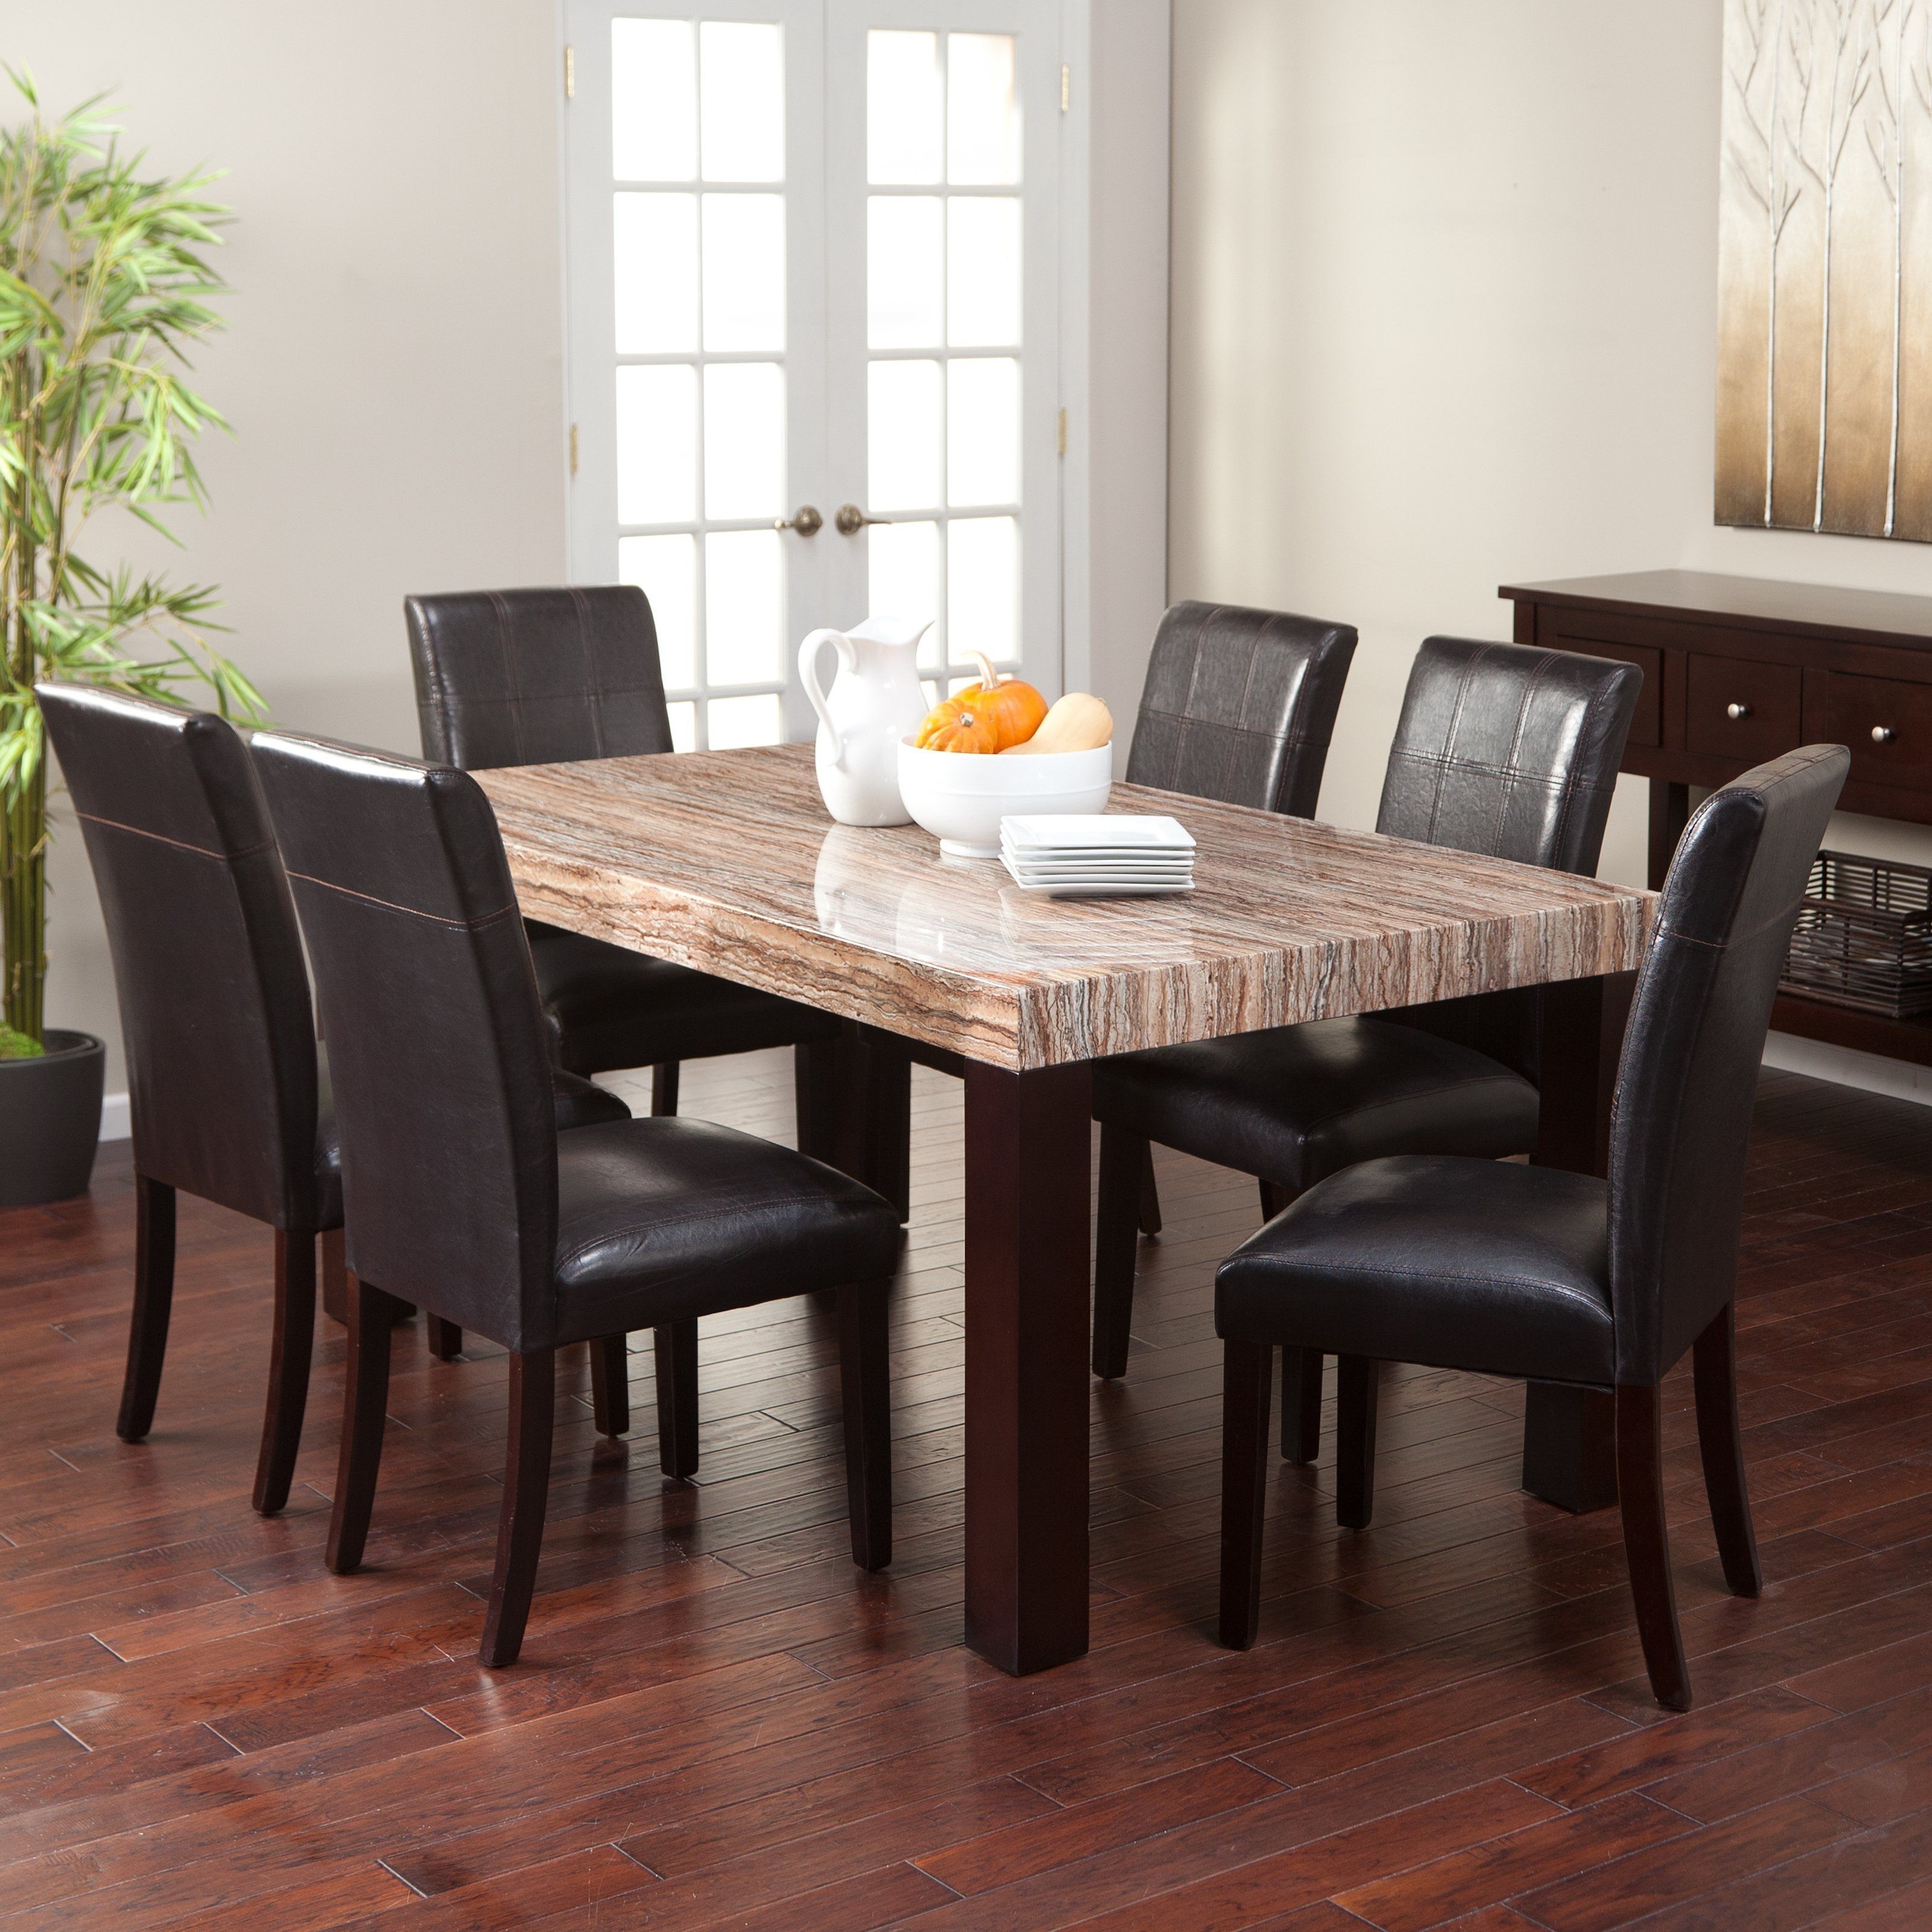 Most Current Carmine 7 Piece Dining Table Set – With Its Creamy Caramel Colored Intended For Palazzo 6 Piece Rectangle Dining Sets With Joss Side Chairs (View 12 of 25)